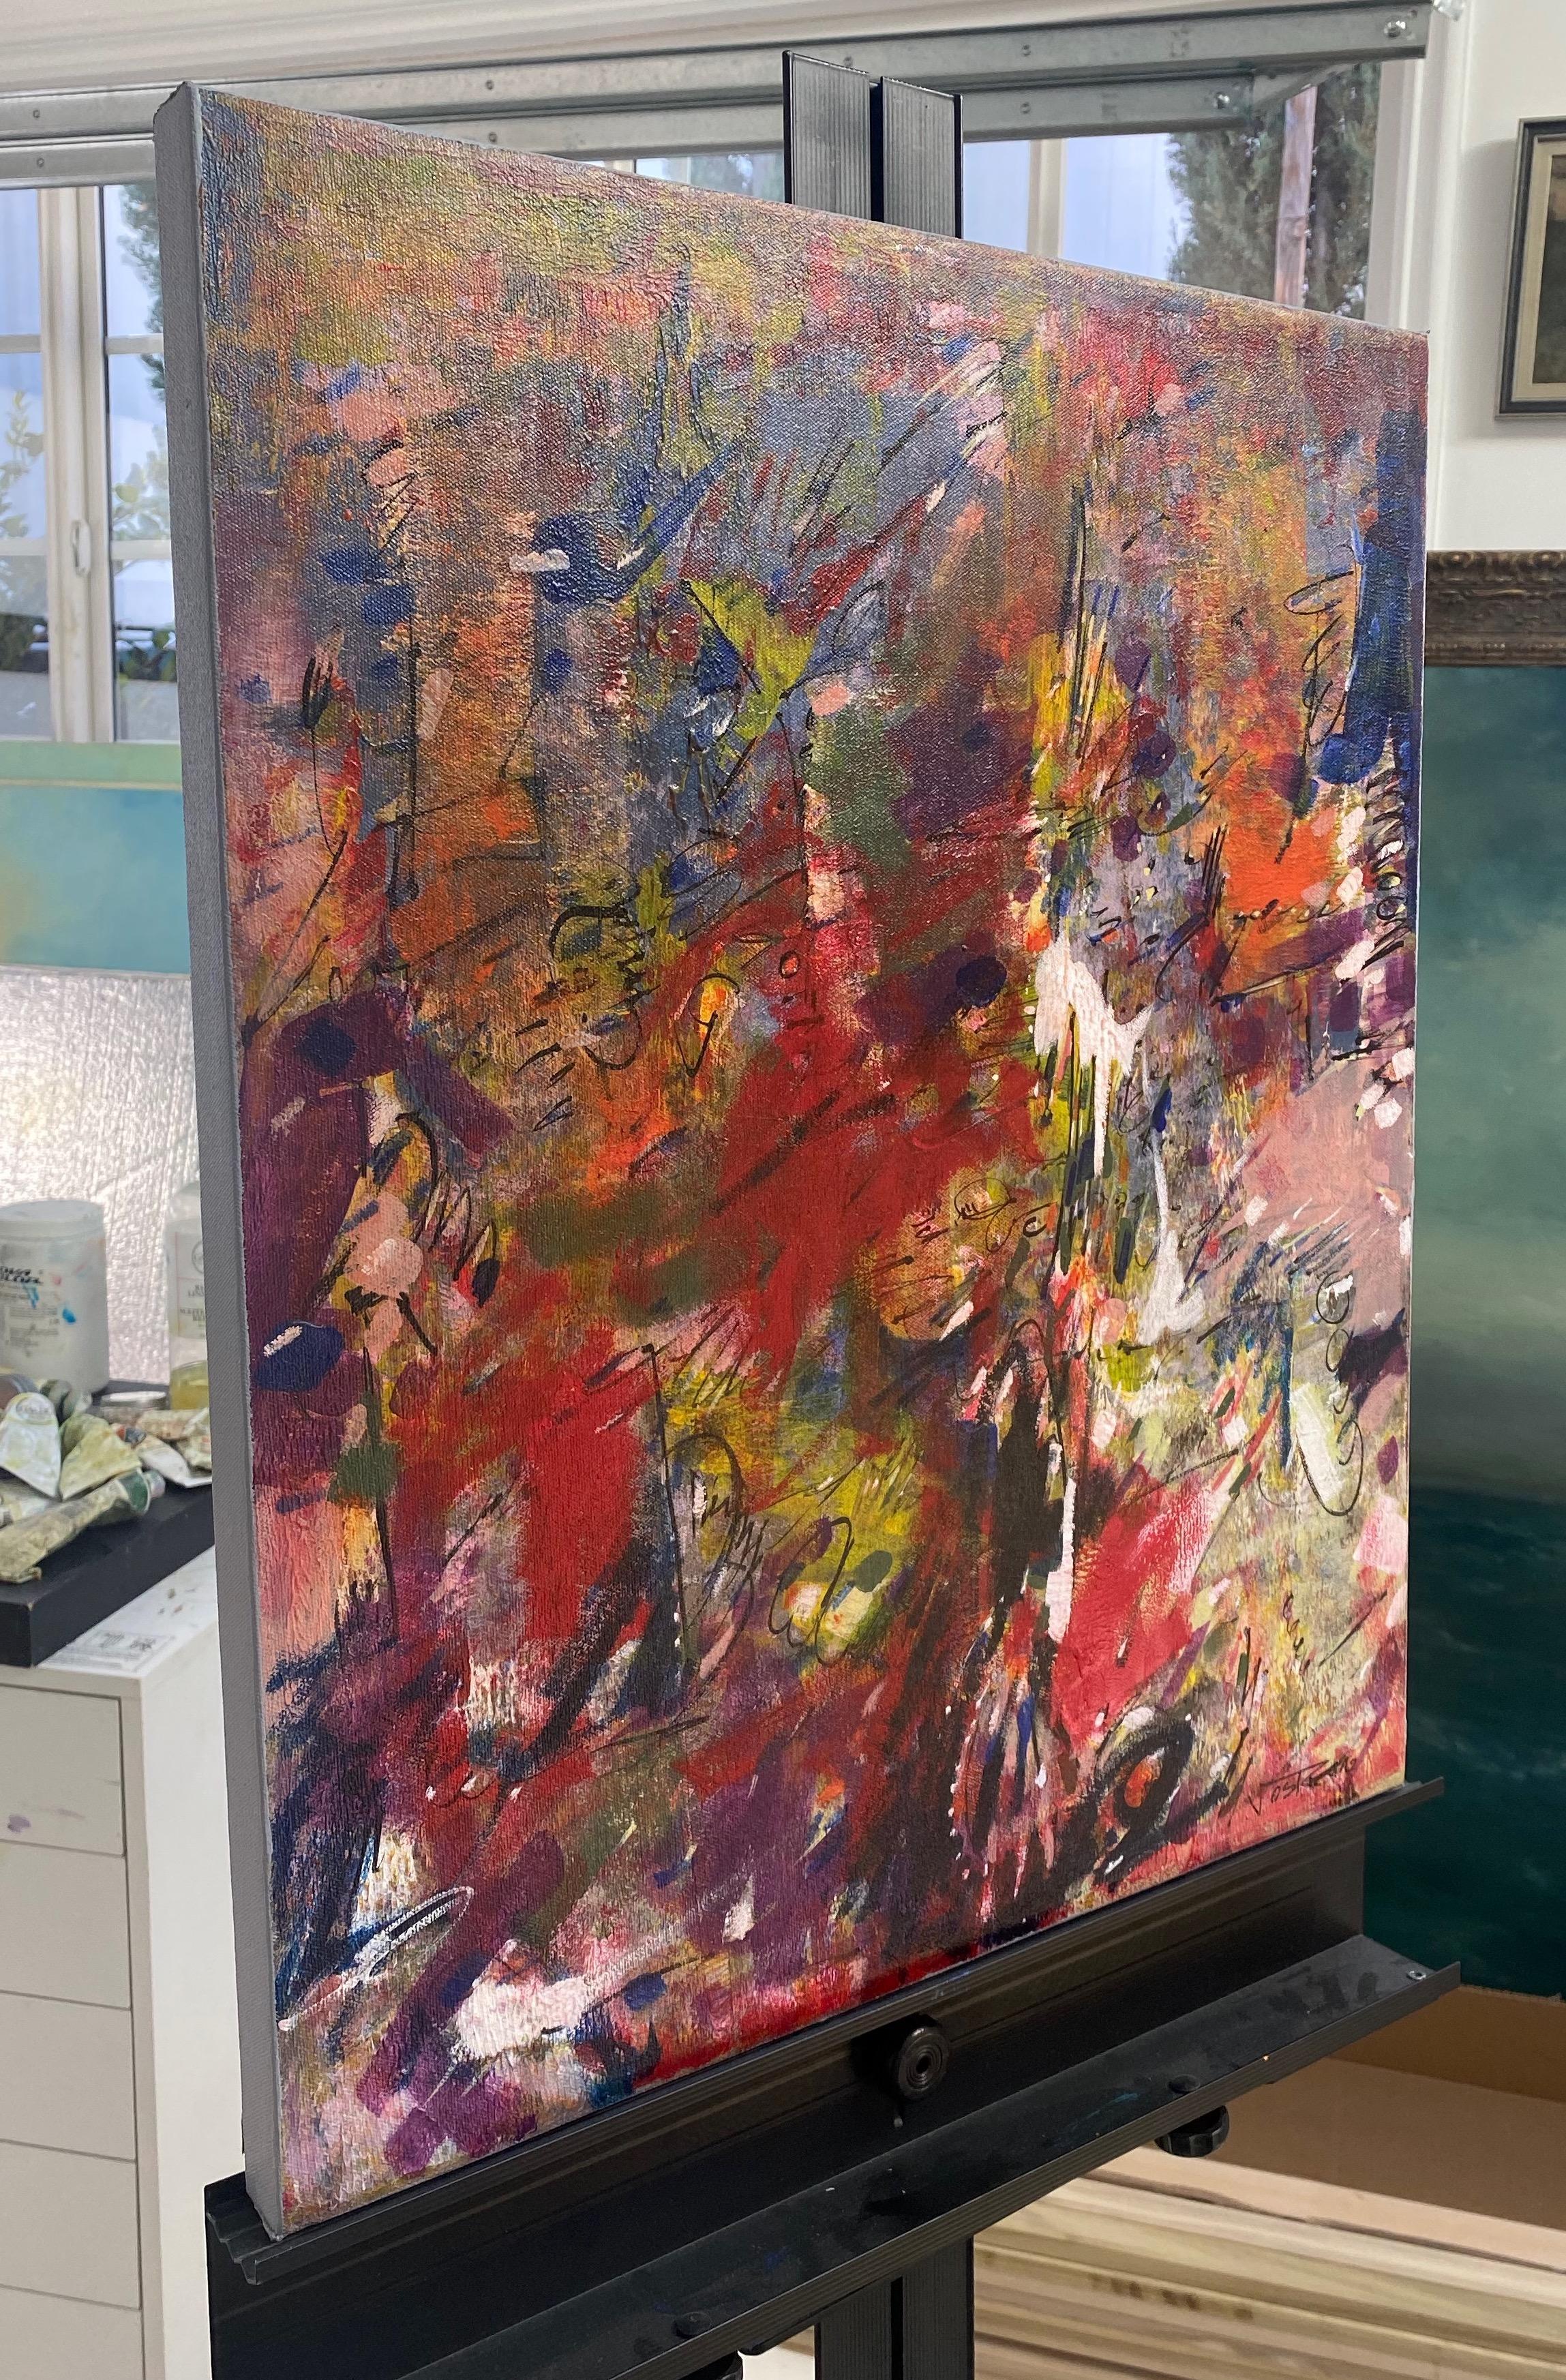 Artist: Voskan Galstian 
Work: Original Acrylic Painting, Handmade Artwork, One of a Kind 
Medium: Acrylic on Canvas 
Year: 2022
Style: Abstract Art, 
Subject: Red Freedom,
Size: 24